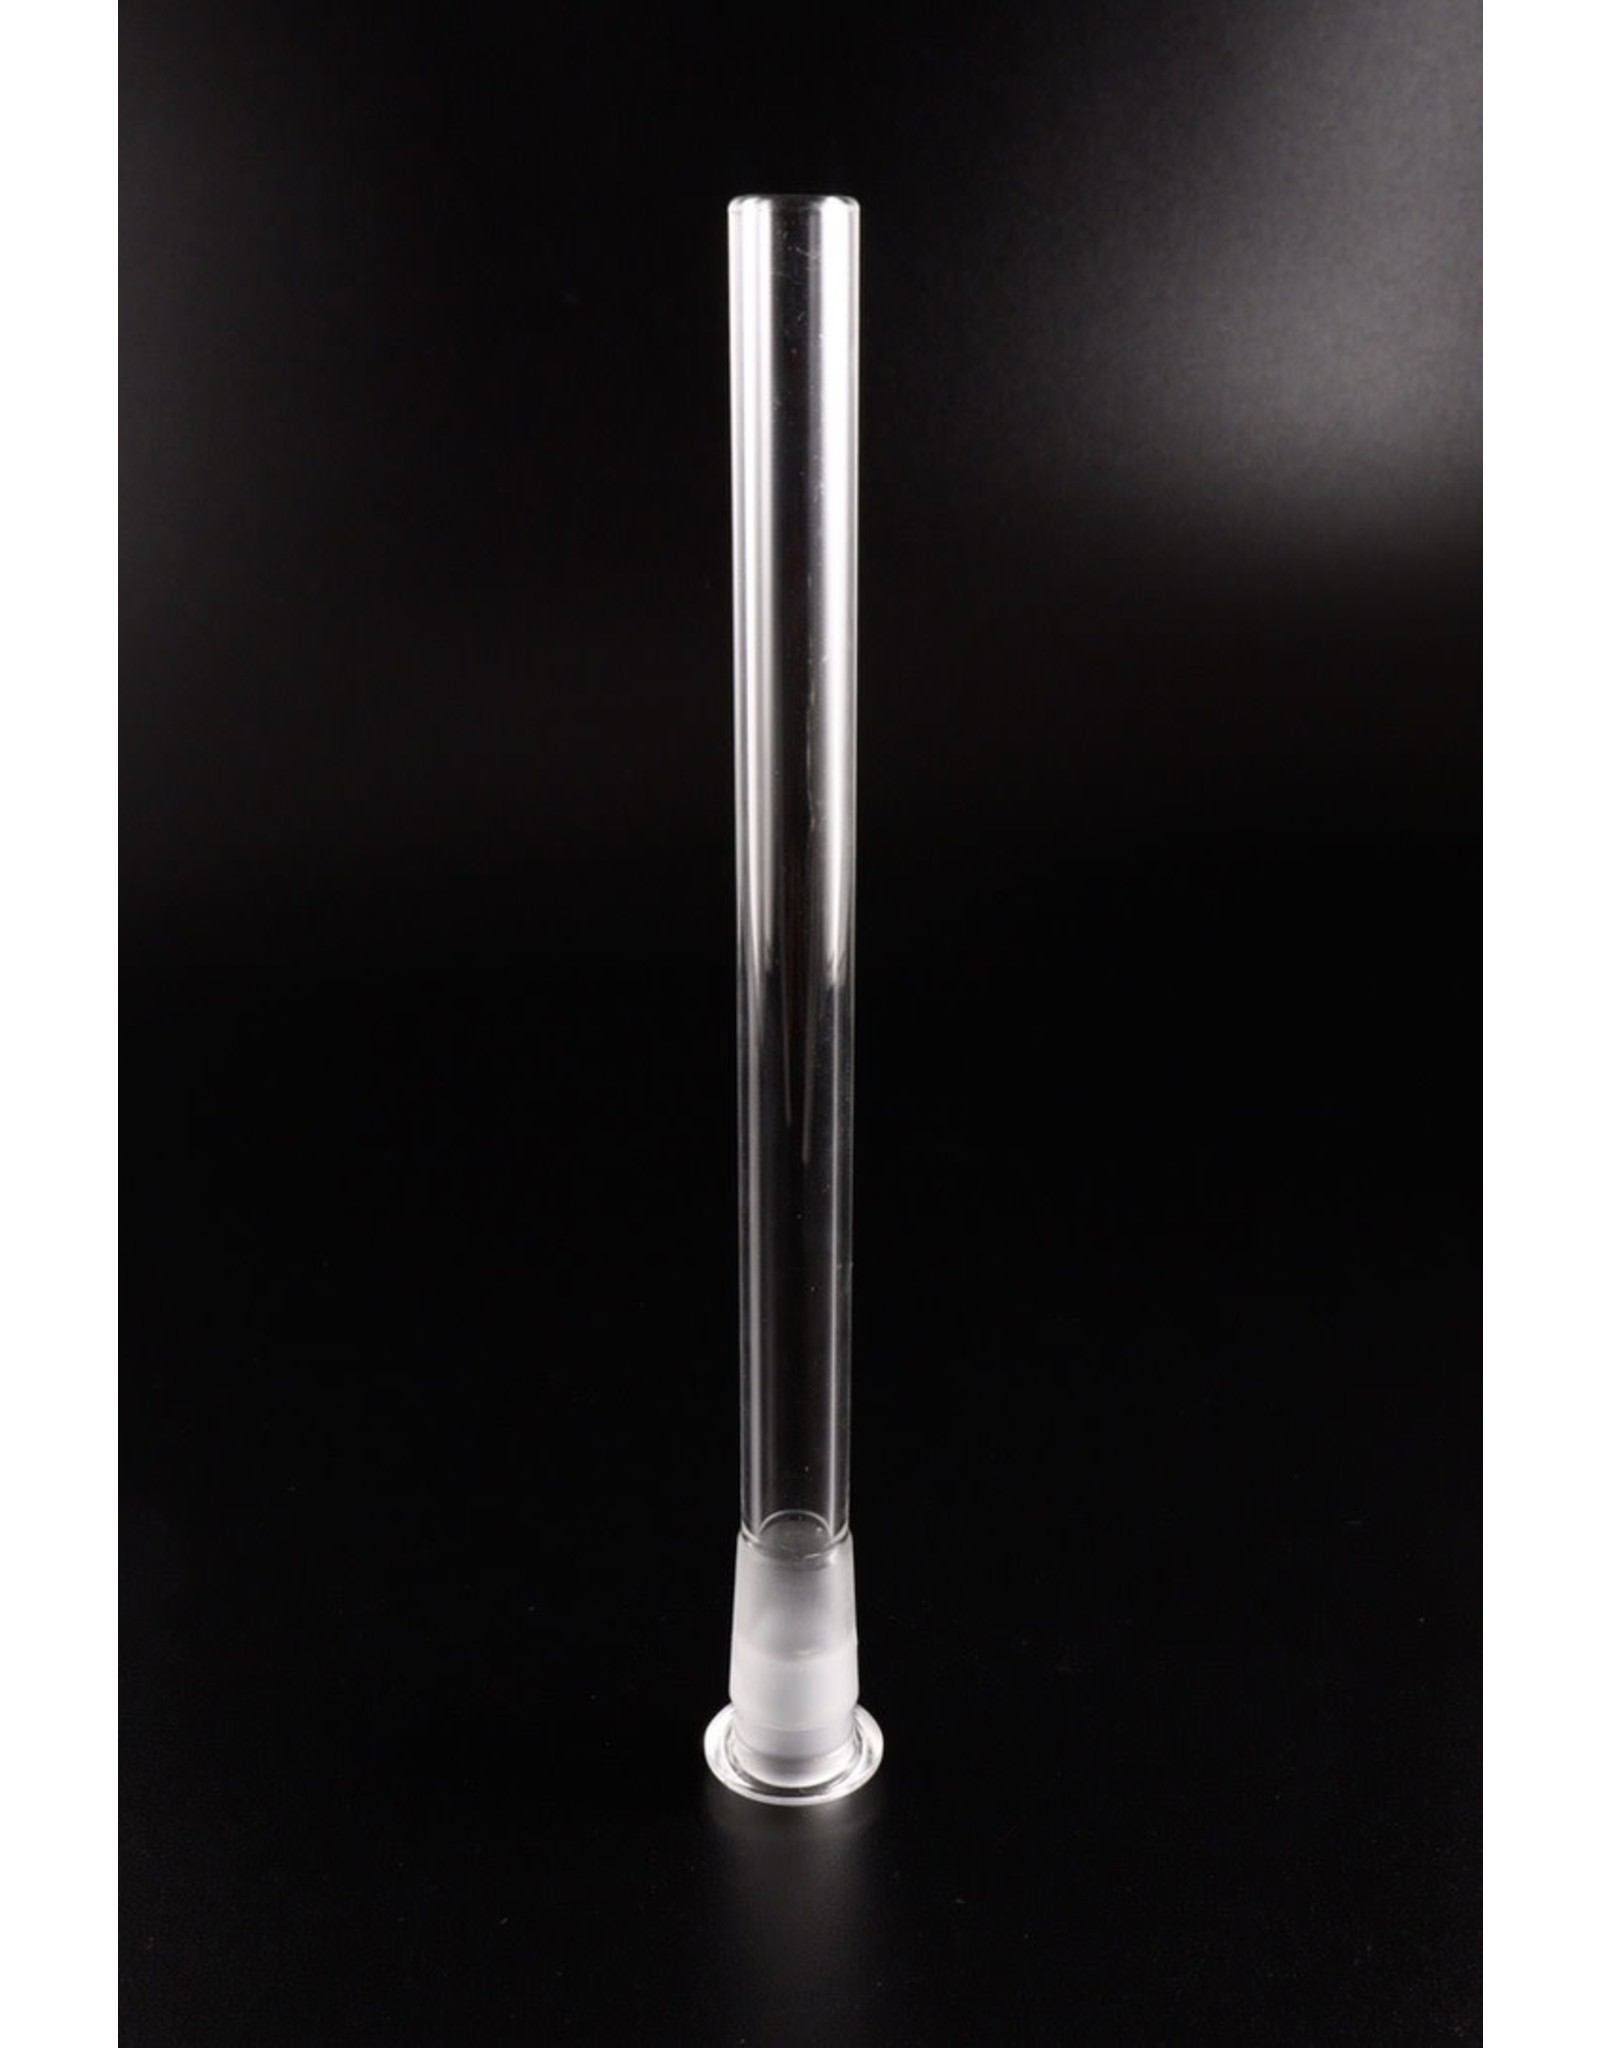 Lil Ben GonG Lo Pro Downstem (19/14) for 14mm Bowls